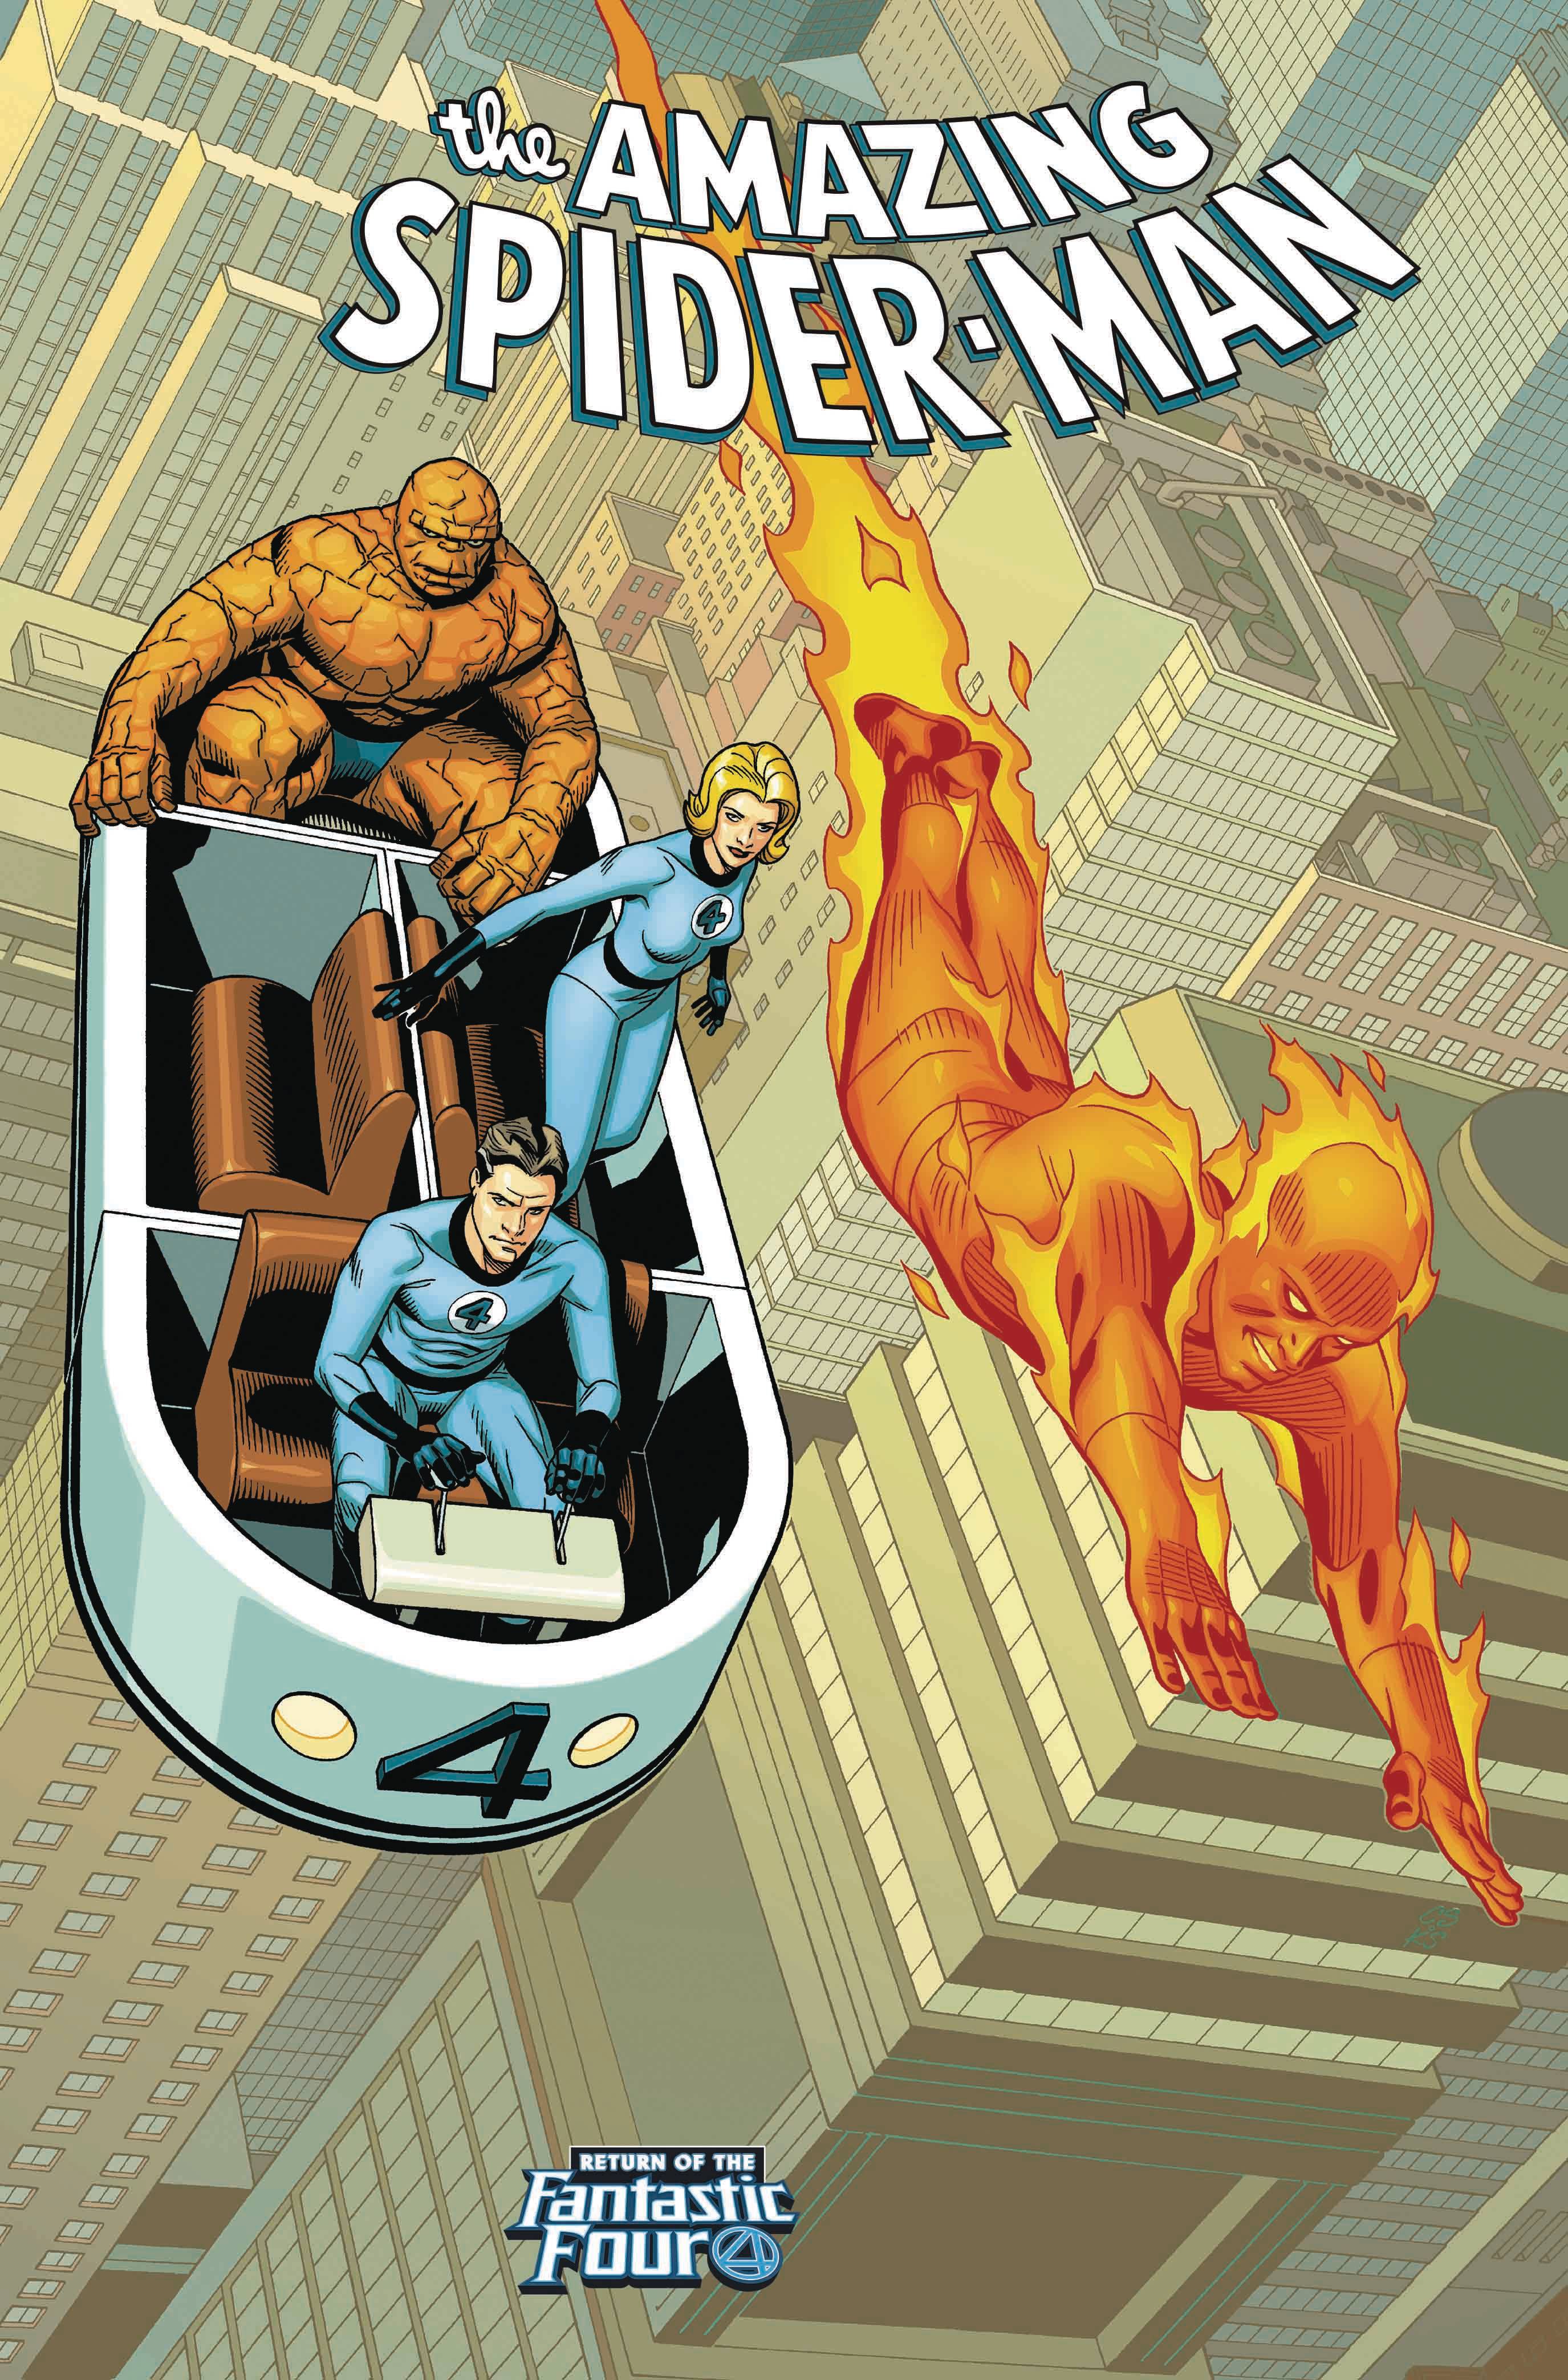 Amazing Spider-Man #4 Sprouse Return of Fantastic Four Variant (2018)